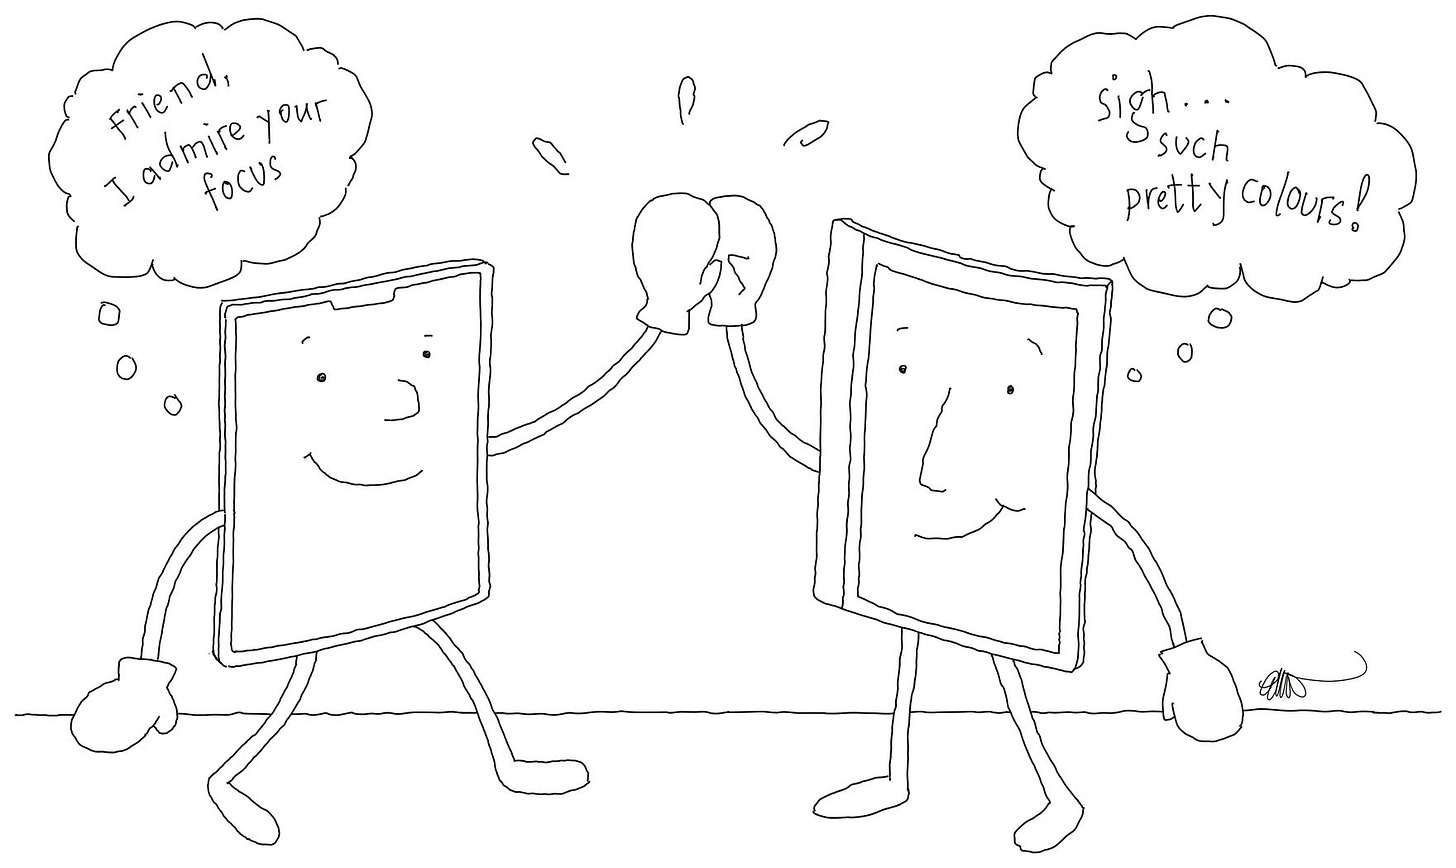 Cartoon of an iPad and a reMarkable 2 wearing boxing gloves. Both devices are smiling while facing each other. They each have one hand up for a high five. Each device has a thought bubble. The iPad is thinking, “Friend, I admire your focus”, and the reMarkable is thinking, “Sigh…such pretty colours!”